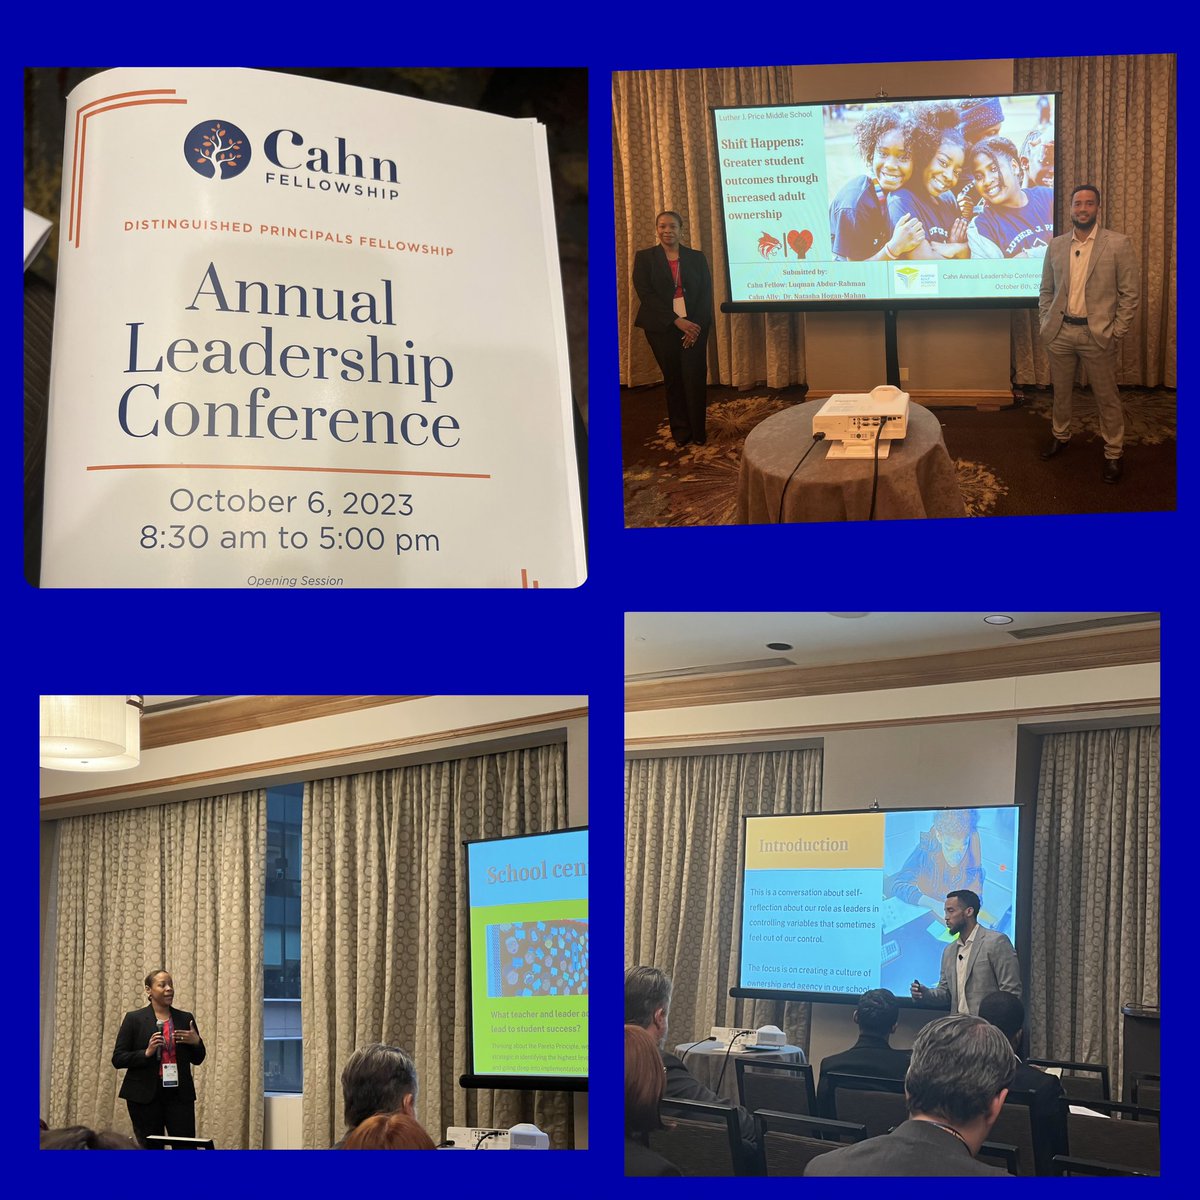 Learning about addressing learning loss & passion loss through ownership from @PricePrincipal @hogan_mahan at the Annual @CahnFellowship Leadership Conference